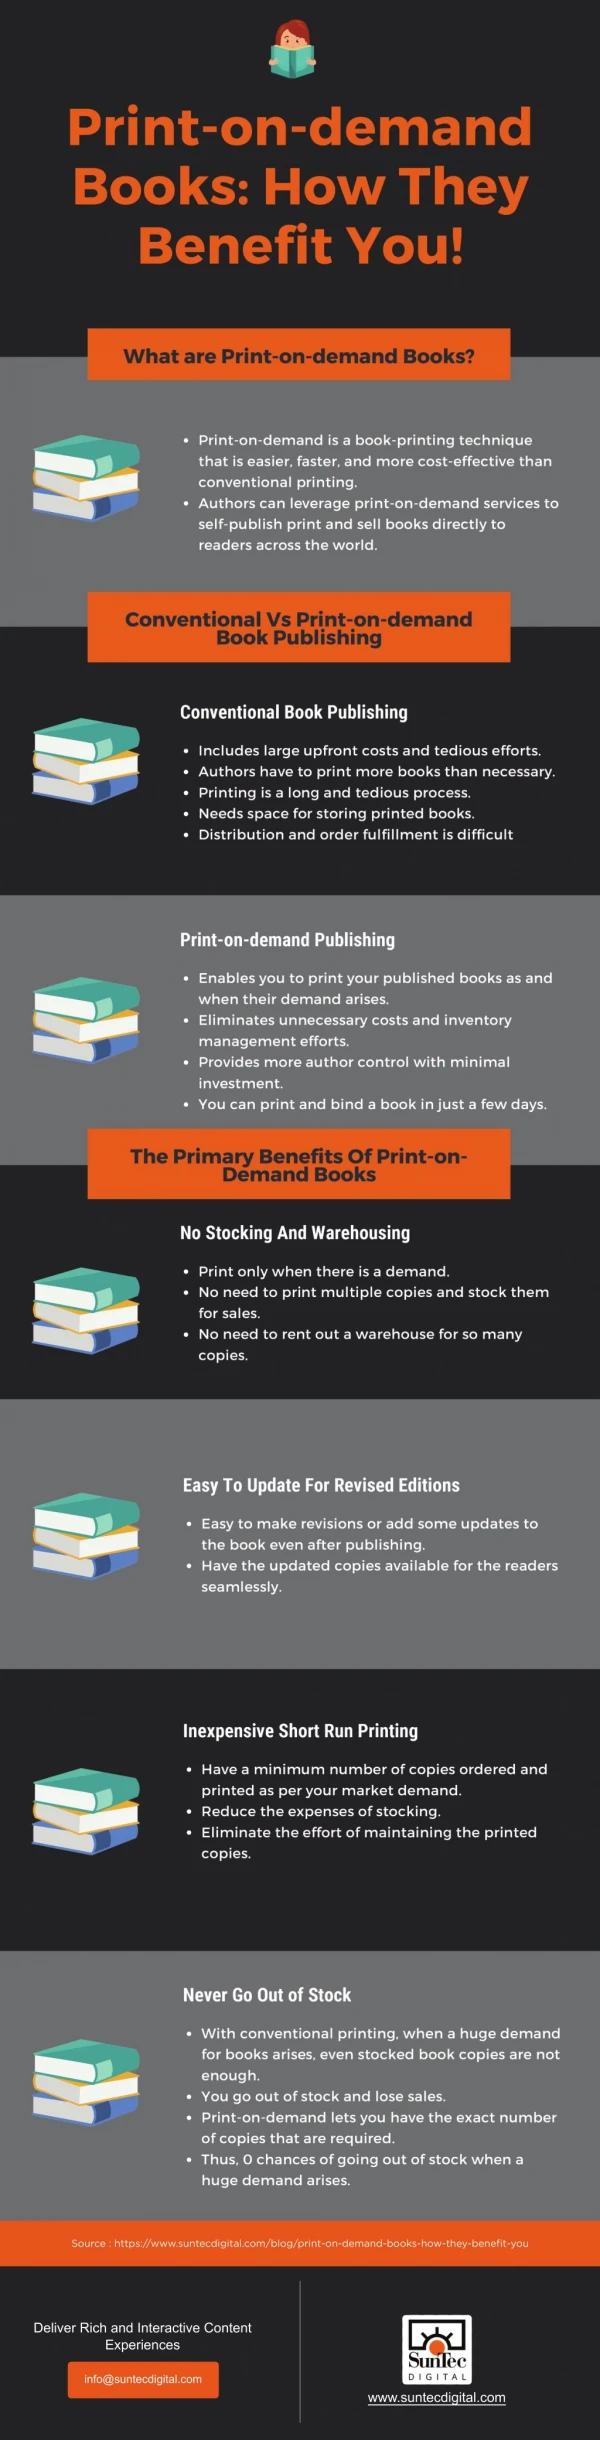 Print-on-demand Books: How They Benefit You!